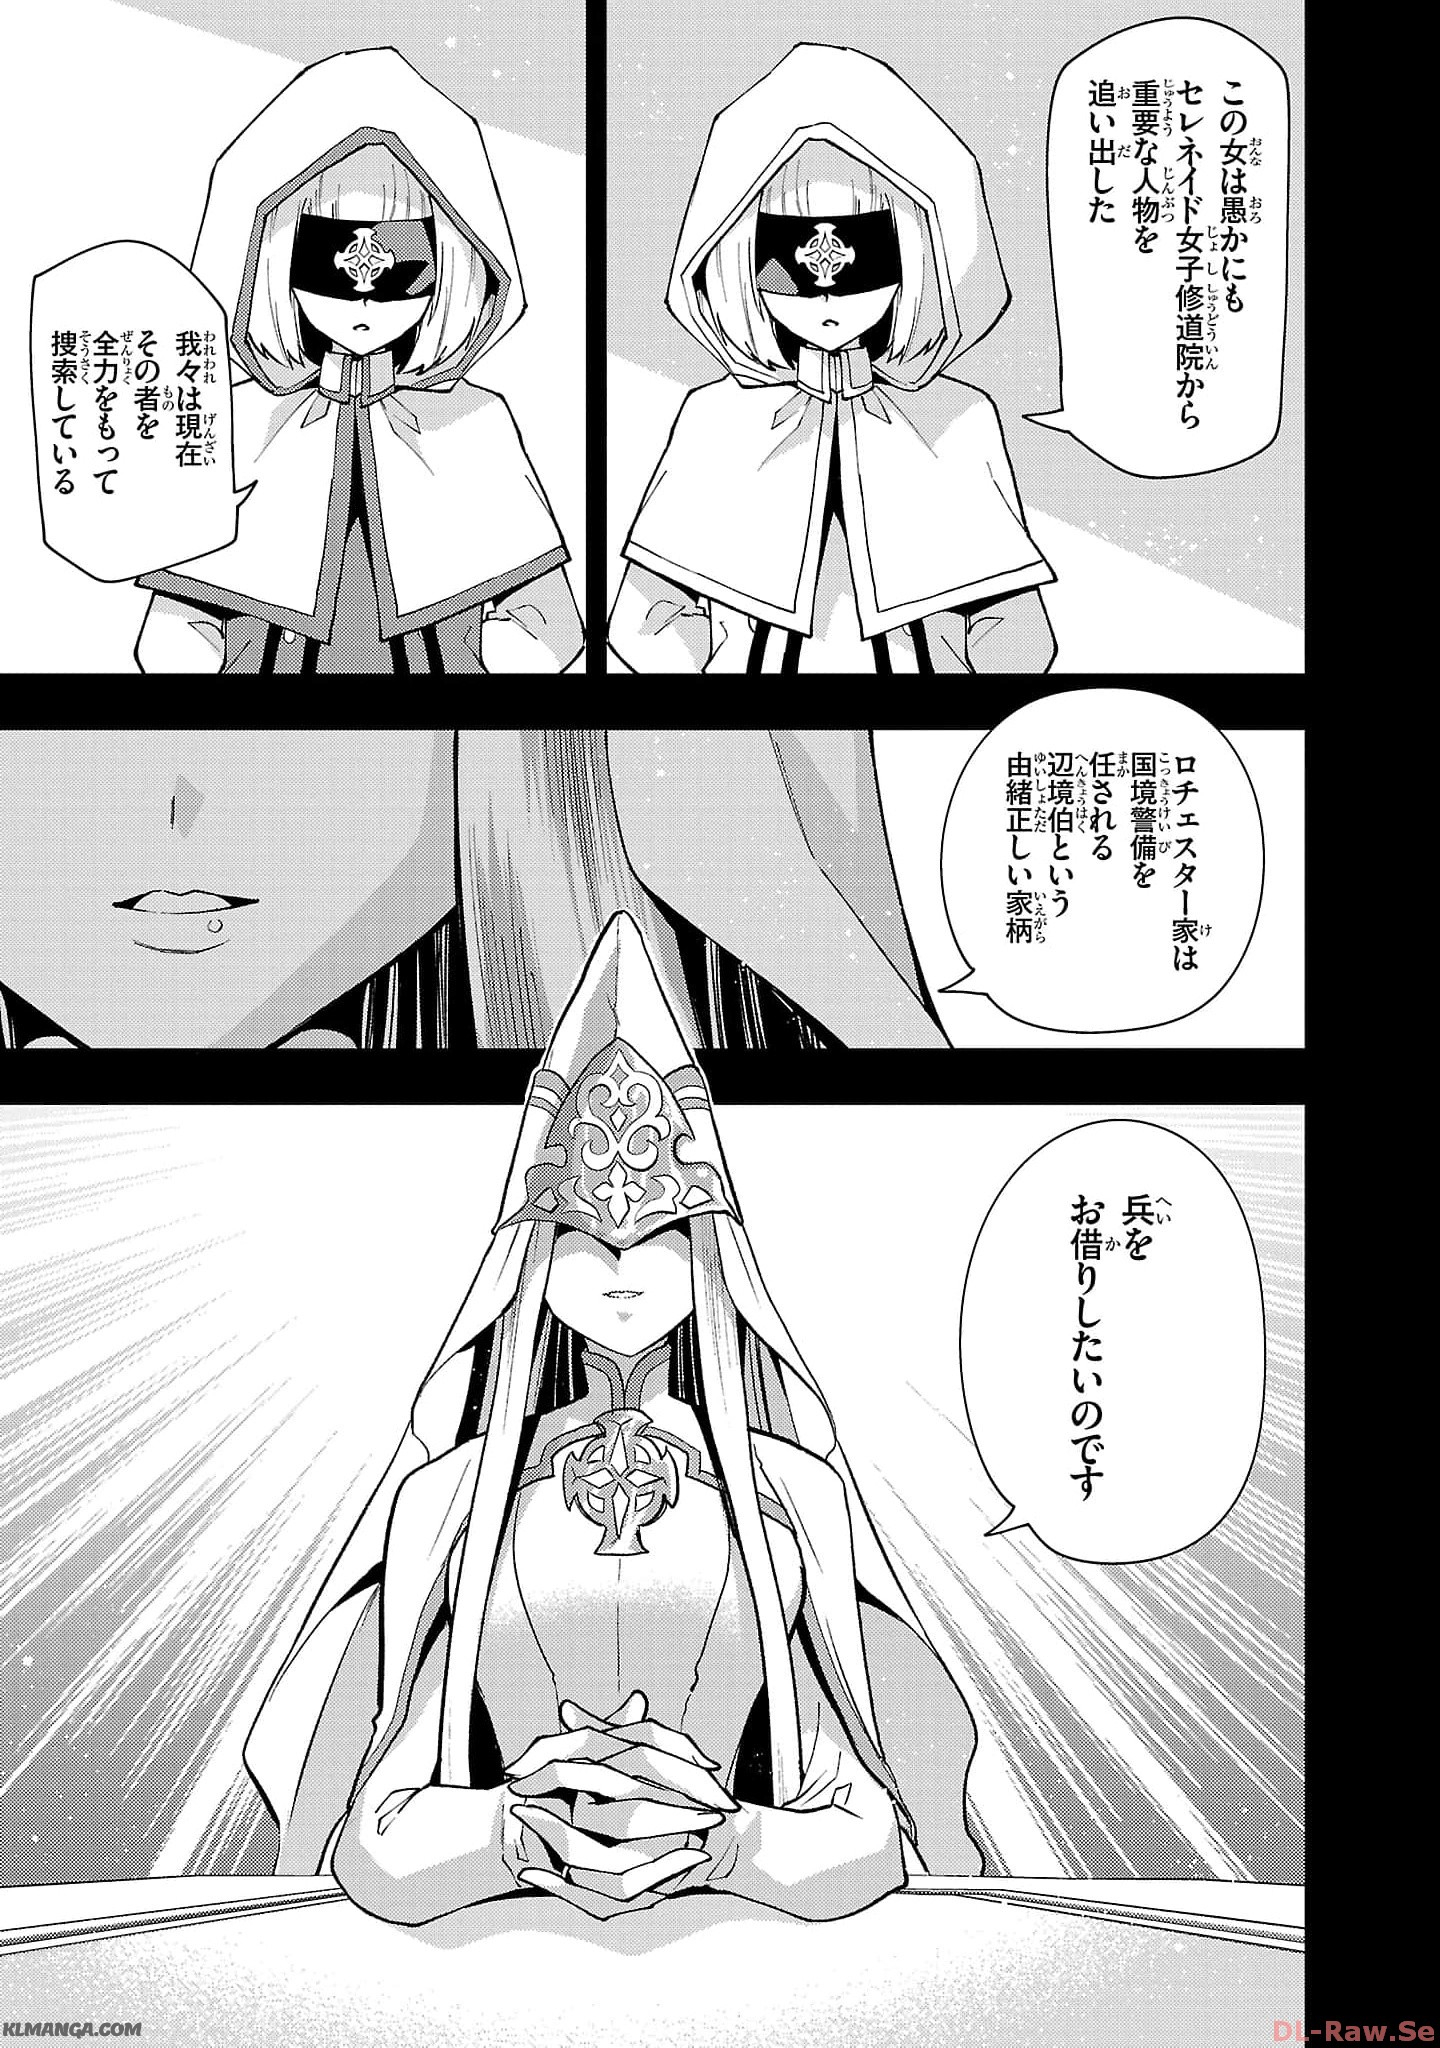 Hungry Saint and Full-Stomach Witch’s Slow Life in Another World! 腹ペコ聖女とまんぷく魔女の異世界スローライフ! 第21話 - Page 5